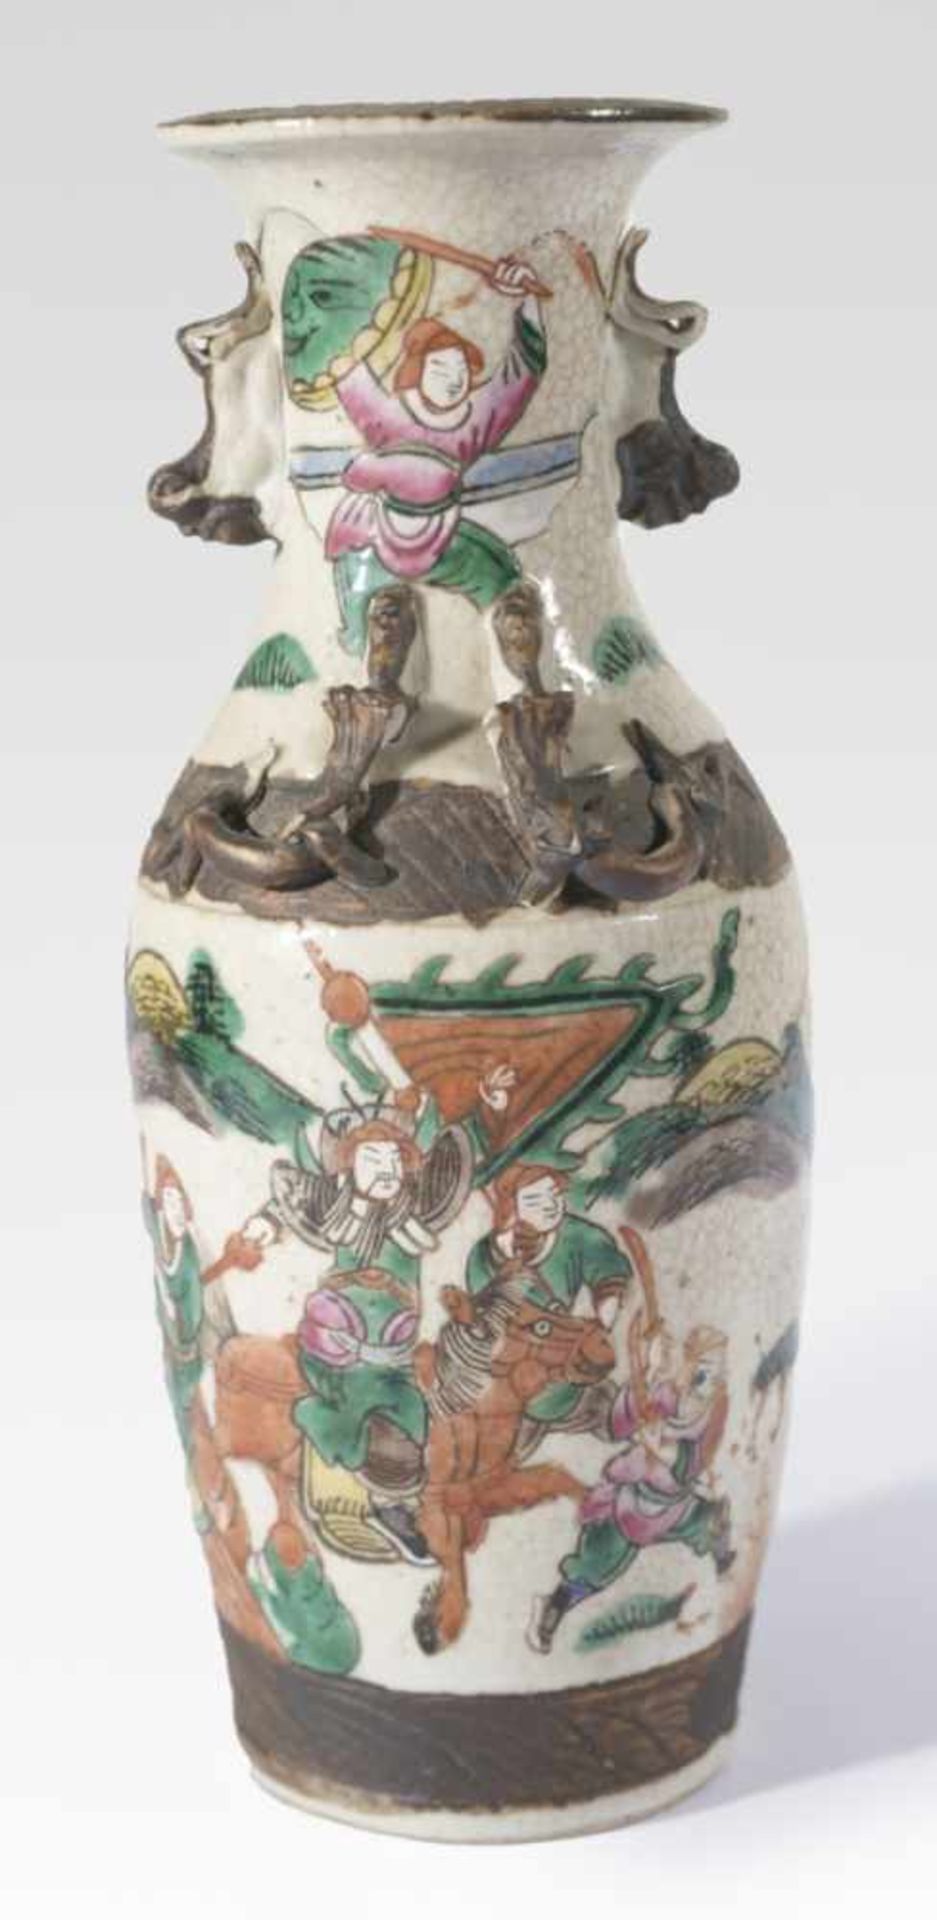 A Japanese Vase with warriors, stone ware, end of 19th c., 25,5 cm high, Provenance: